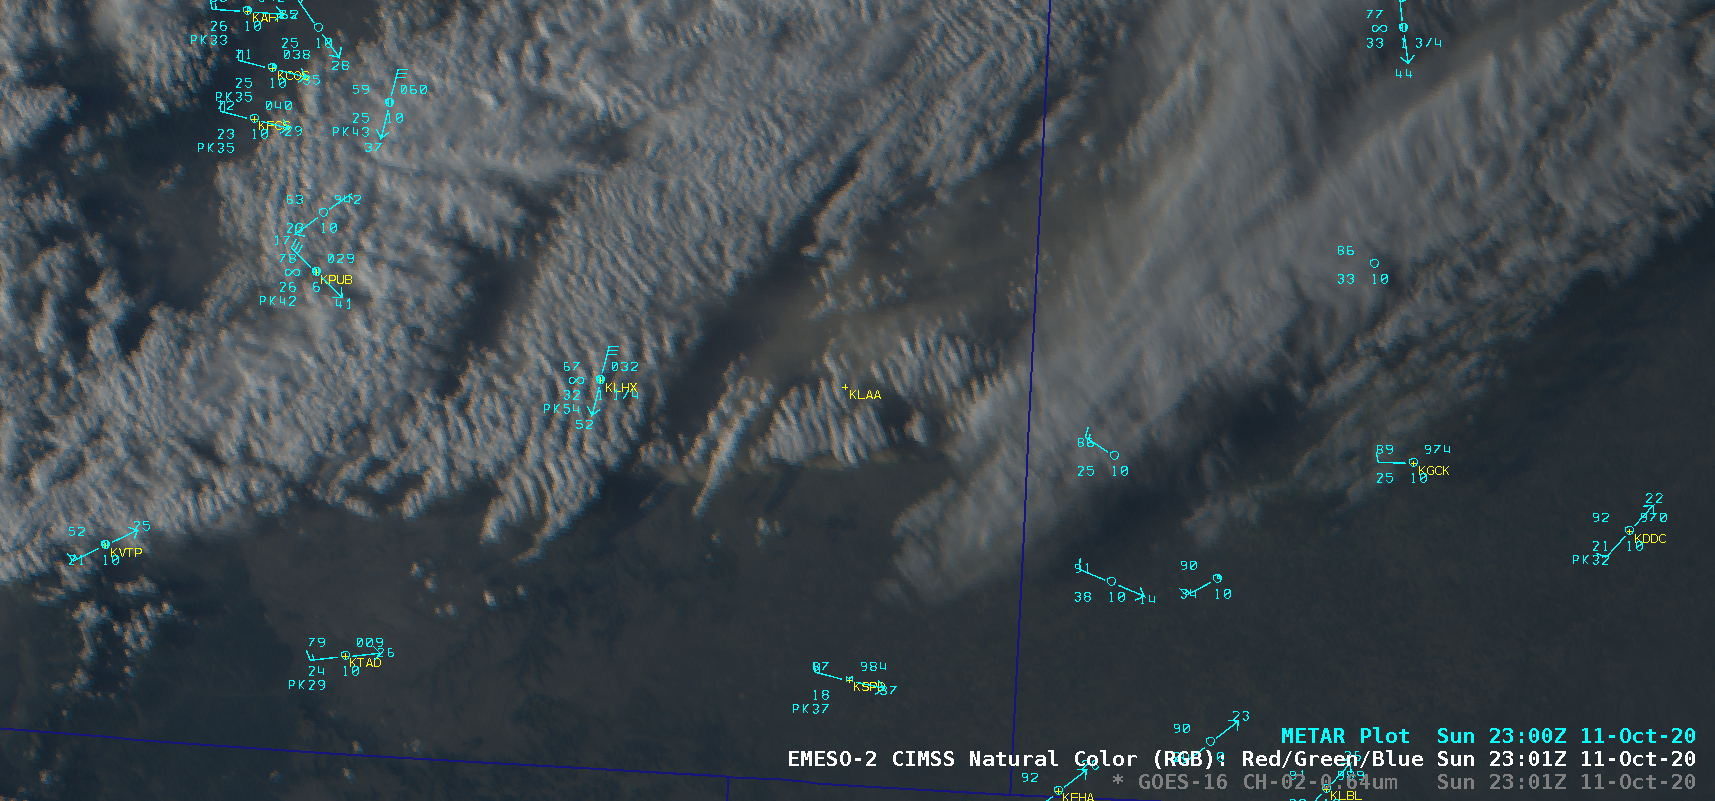 GOES-16 “Red” Visible (0.64 µm) and CIMSS Natural Color RGB images [click to play animation | MP4]